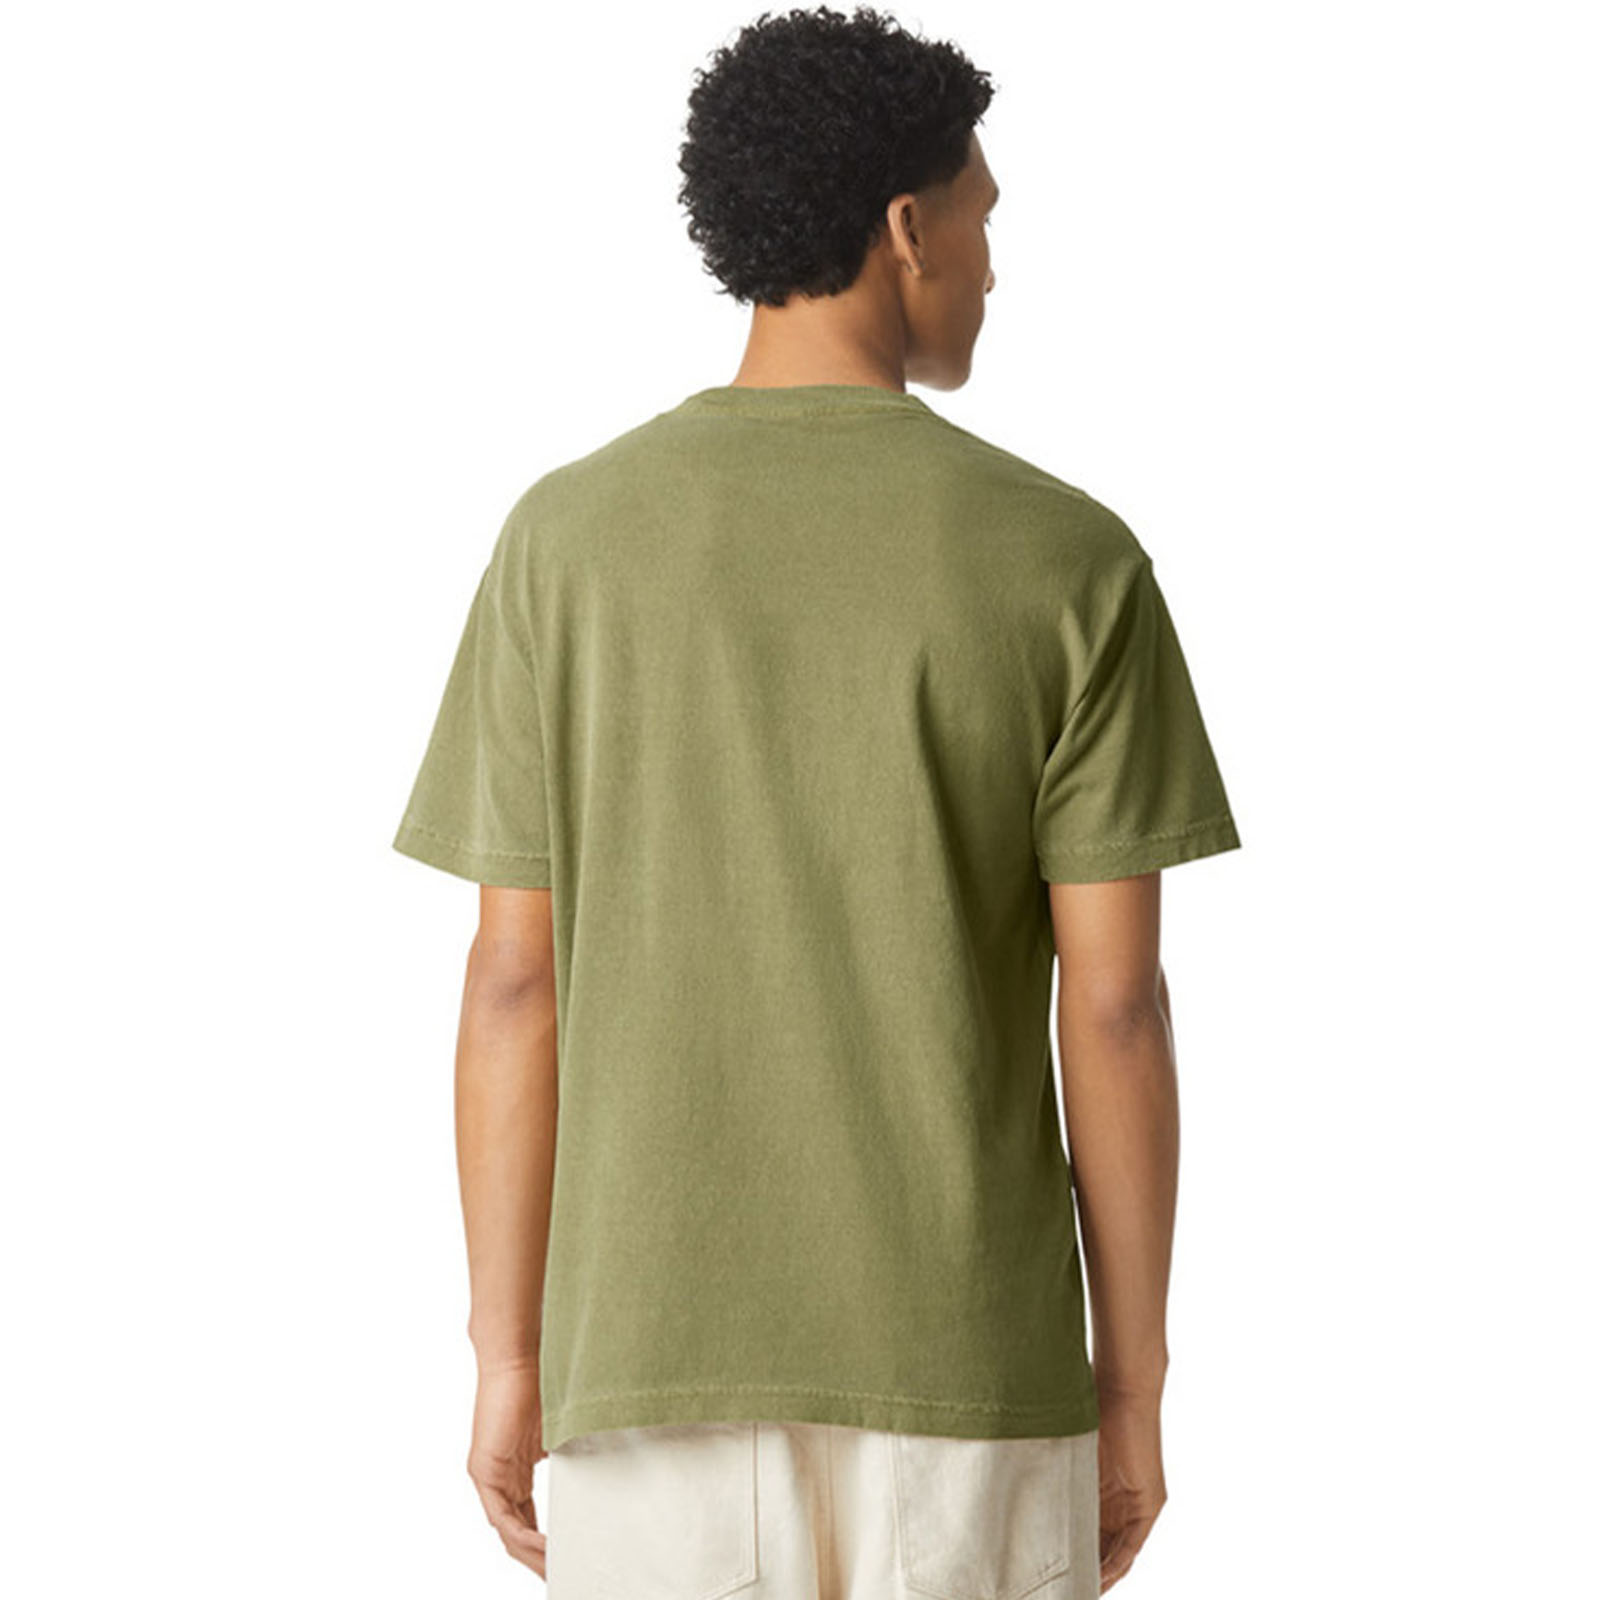 Alstyle 1301GD T-Shirt Back View - Faded Army